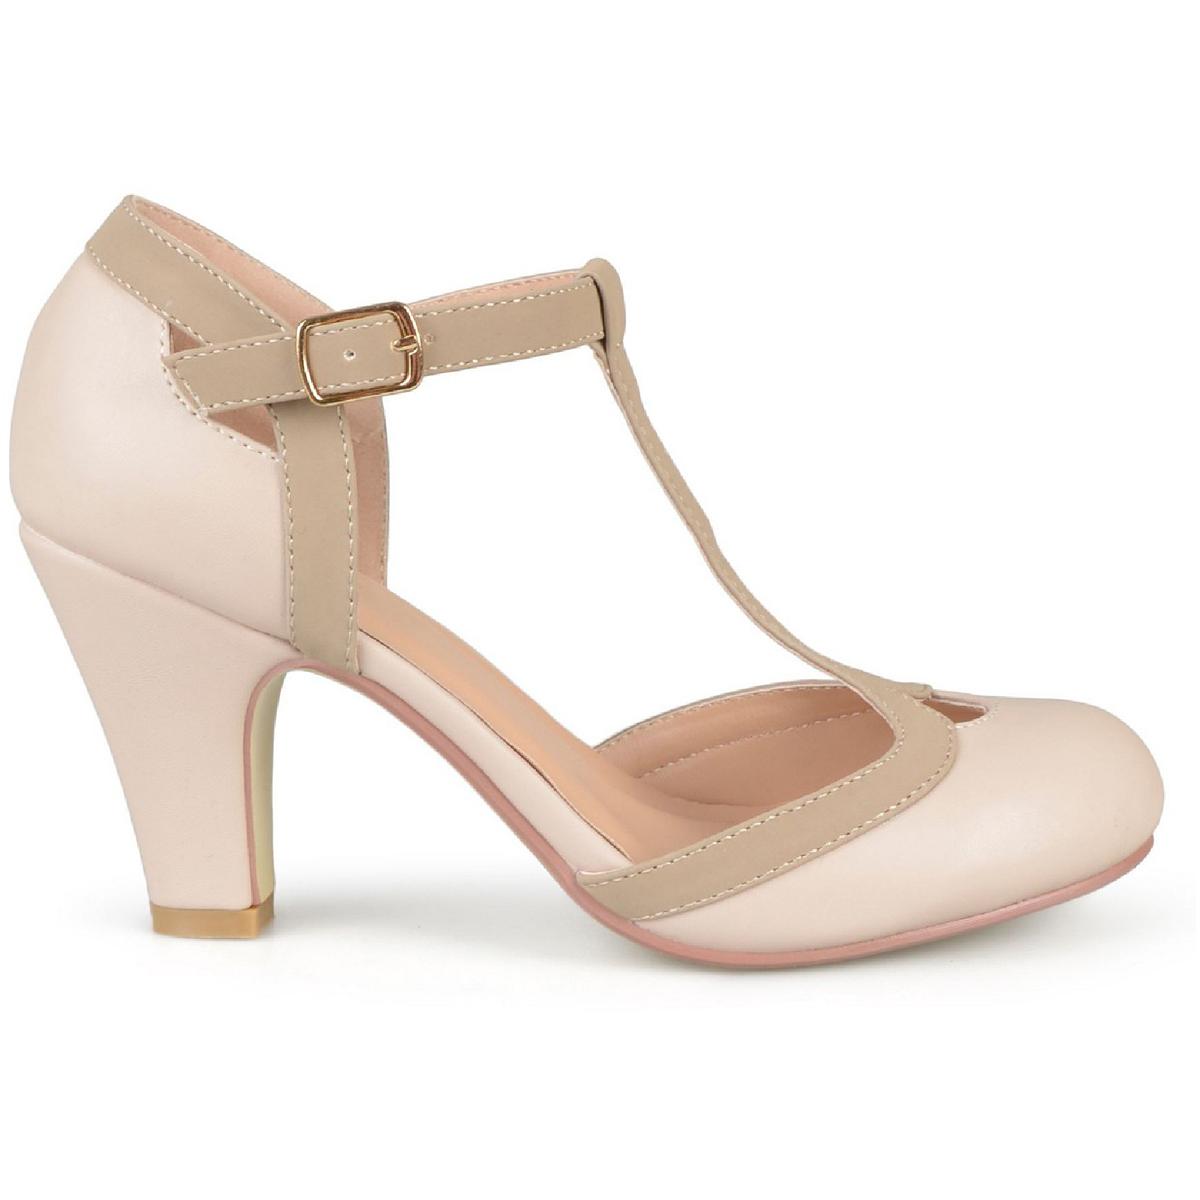 Journee Collection Womens Olina Faux Leather Mary Jane Heels Shoes BHFO ...